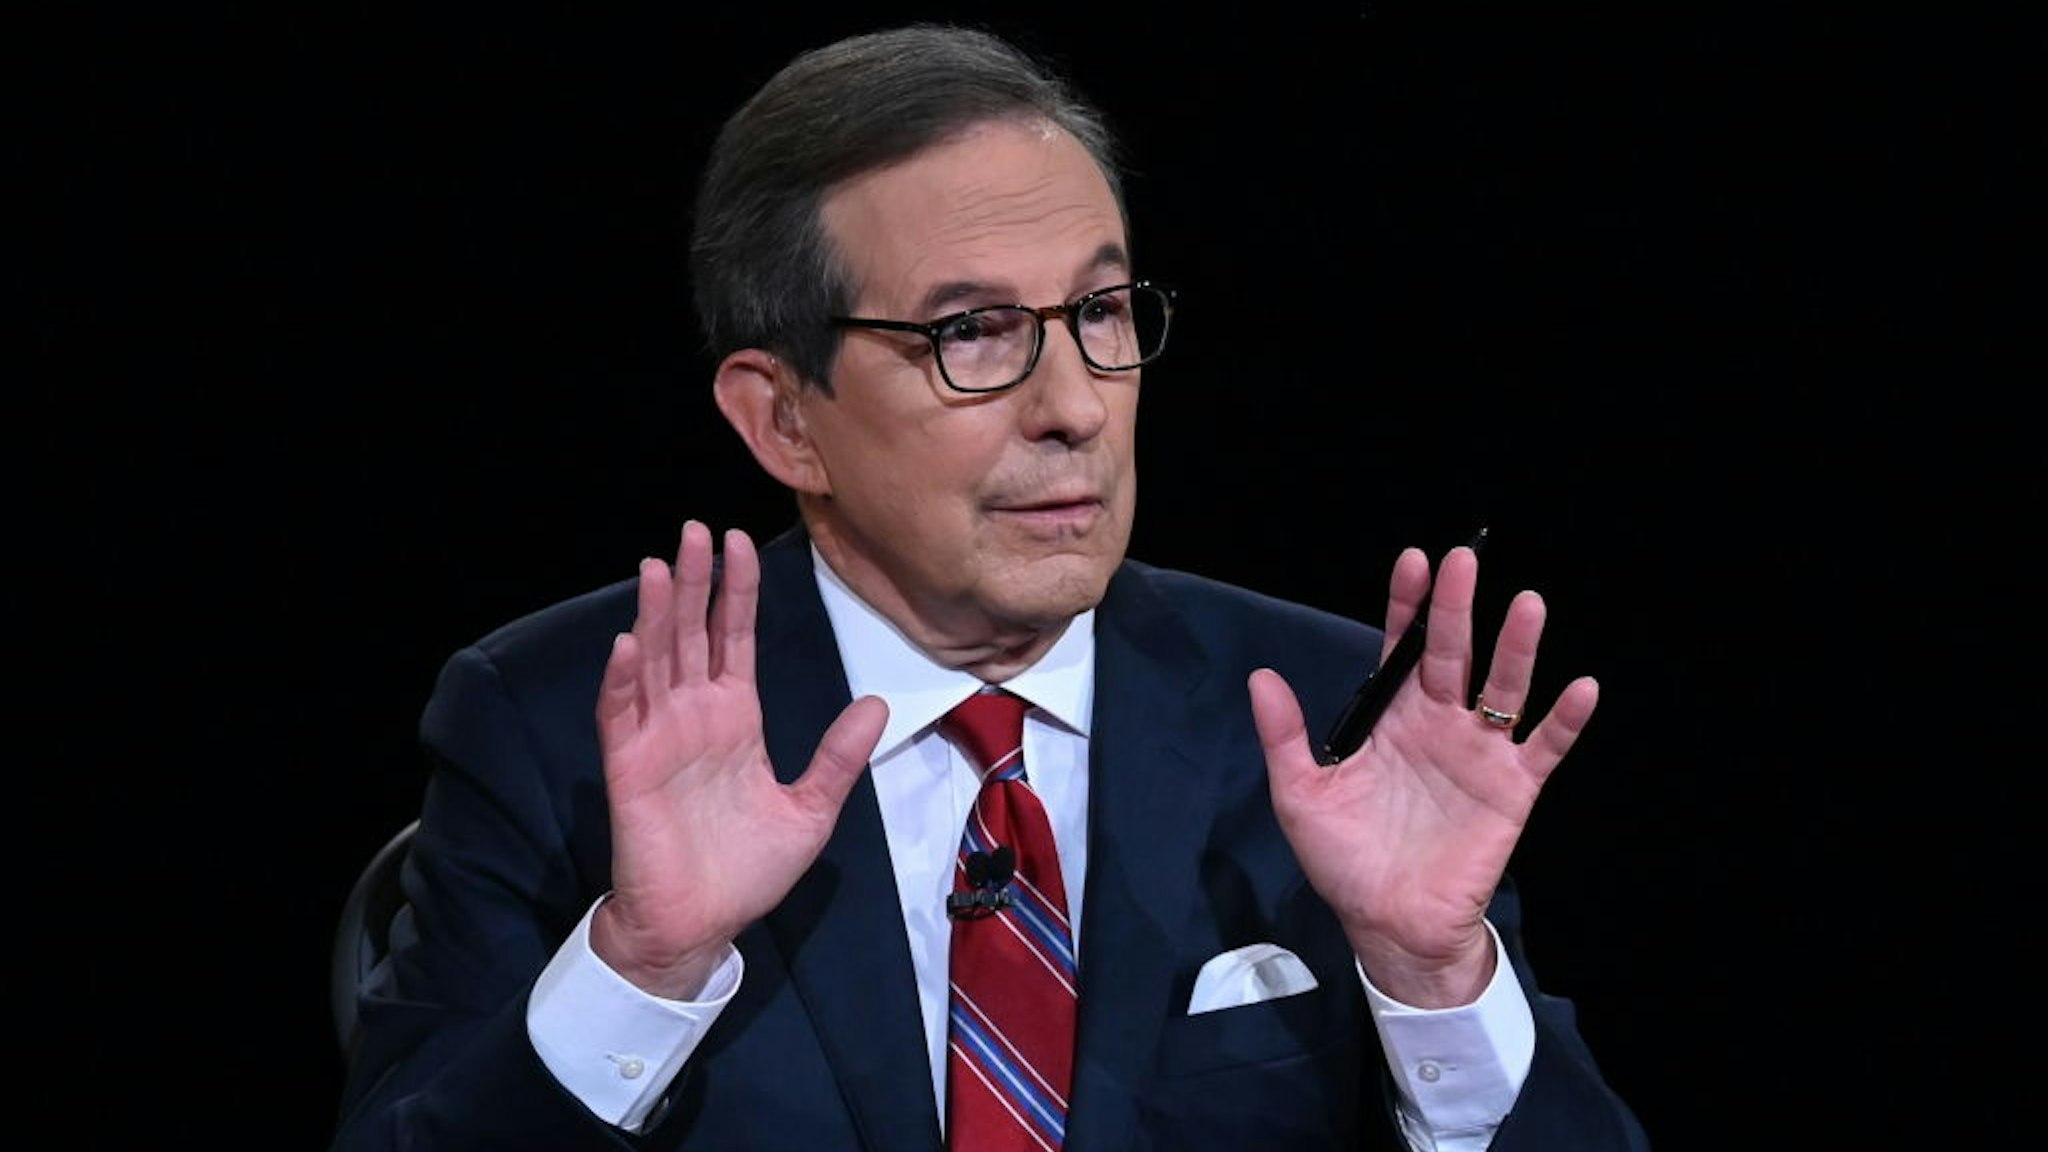 Debate moderator and Fox News anchor Chris Wallace directs the first presidential debate at Case Western Reserve University and Cleveland Clinic in Cleveland, Ohio, on September 29, 2020. (Photo by Olivier Douliery / POOL / AFP) (Photo by OLIVIER DOULIERY/POOL/AFP via Getty Images)